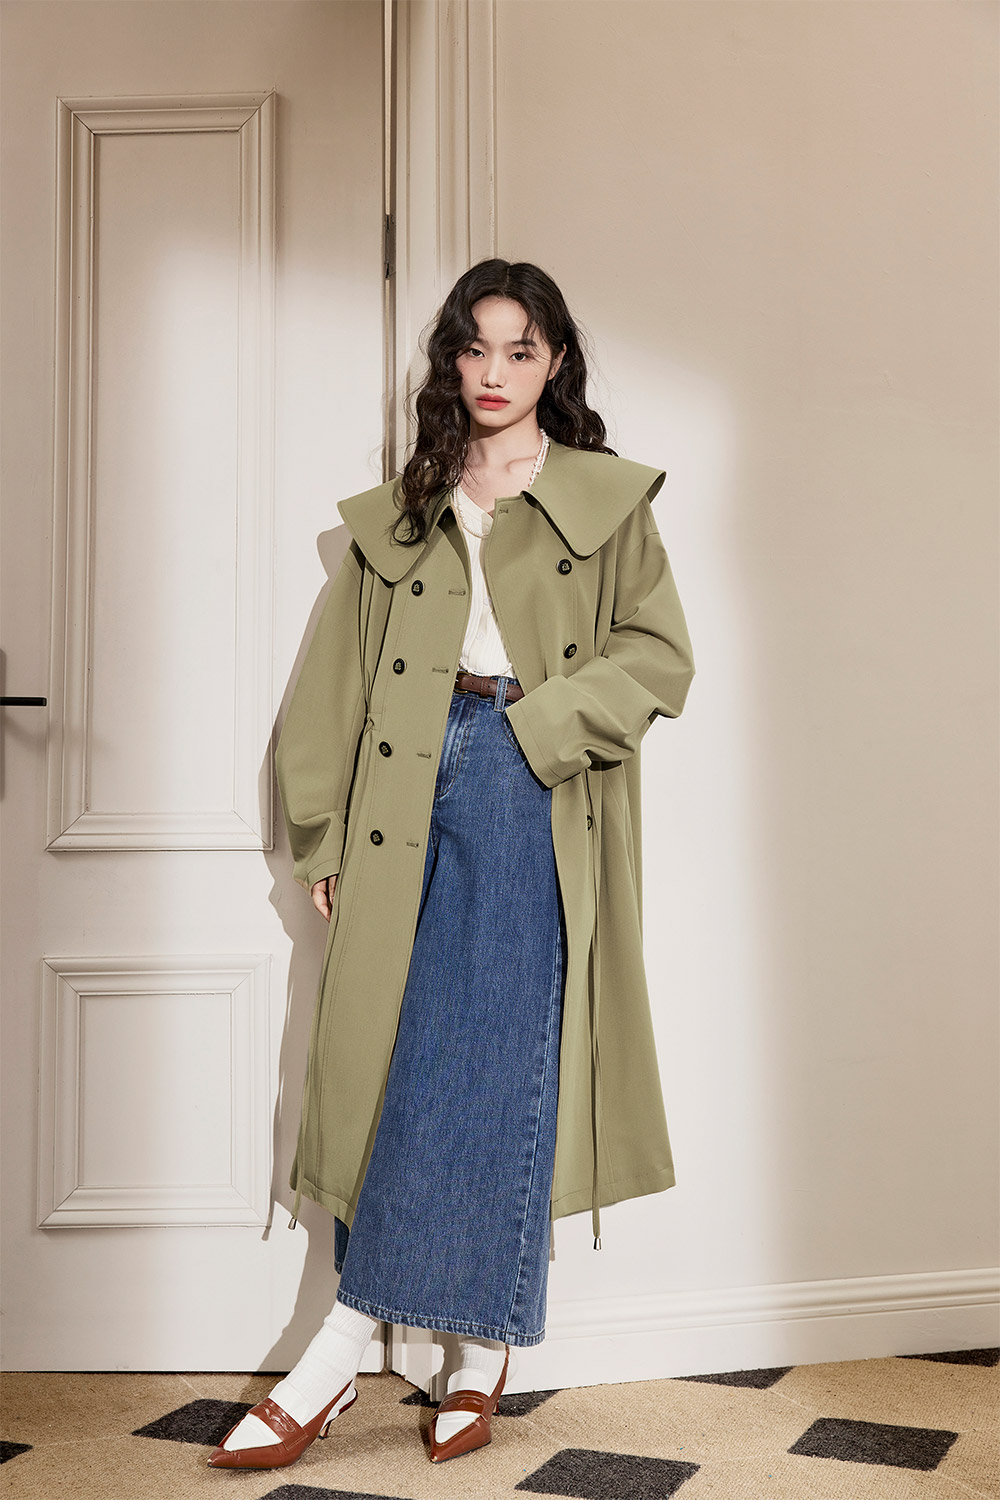 Long waist-length trench coat with large lapels and double-breasted collar